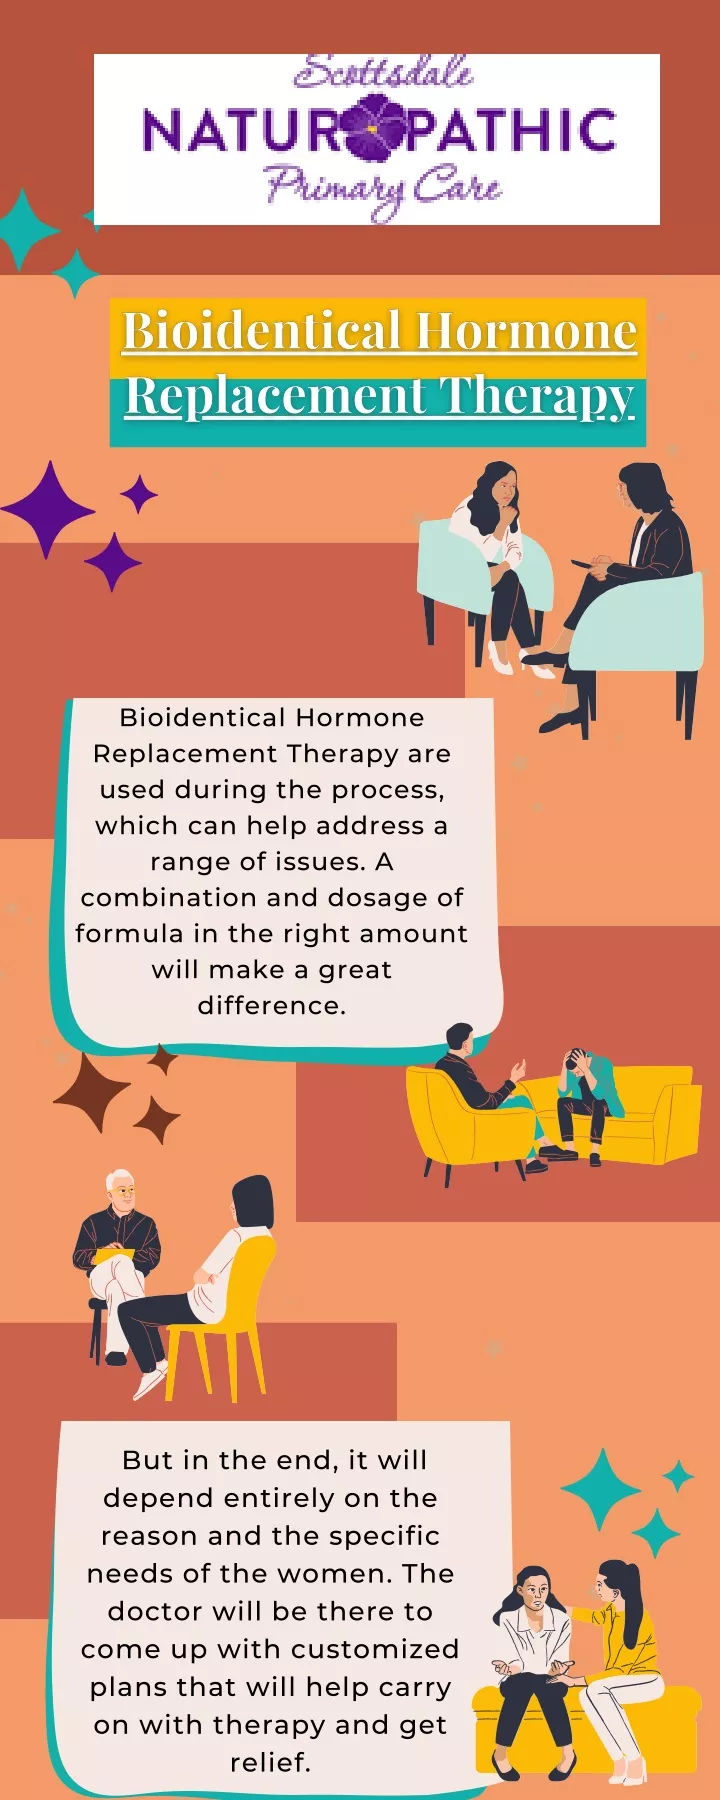 bioidentical hormone replacement therapy are used